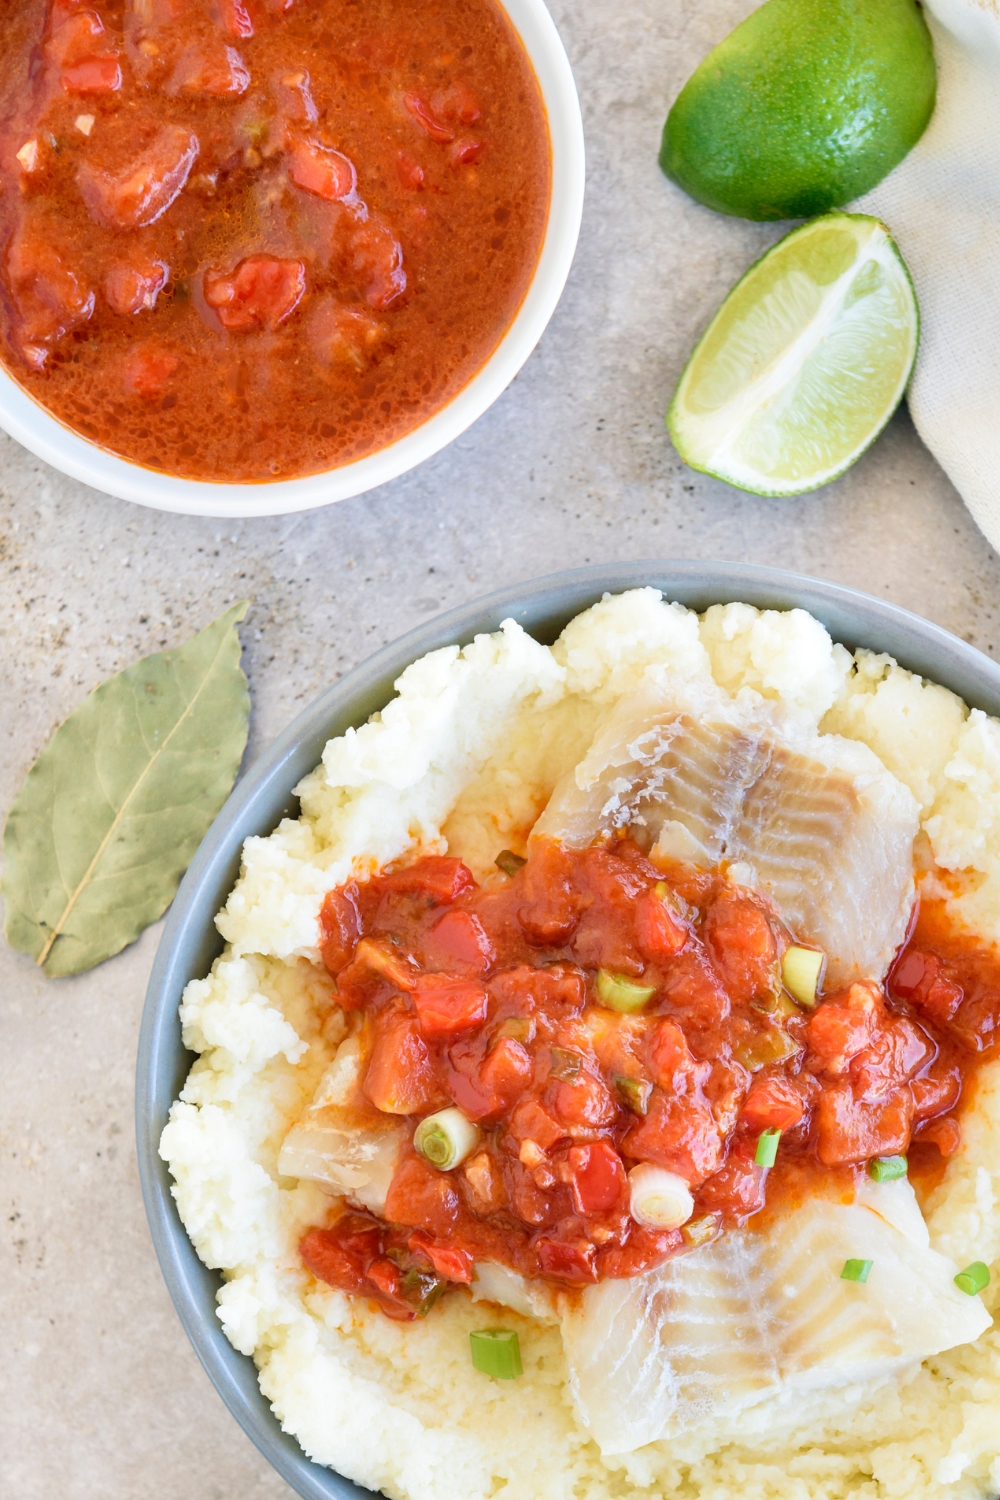 A blue bowl full of fish and grits sits on a gray counter. A white bowl full of tomato sauce and lime wedges sit nearby.